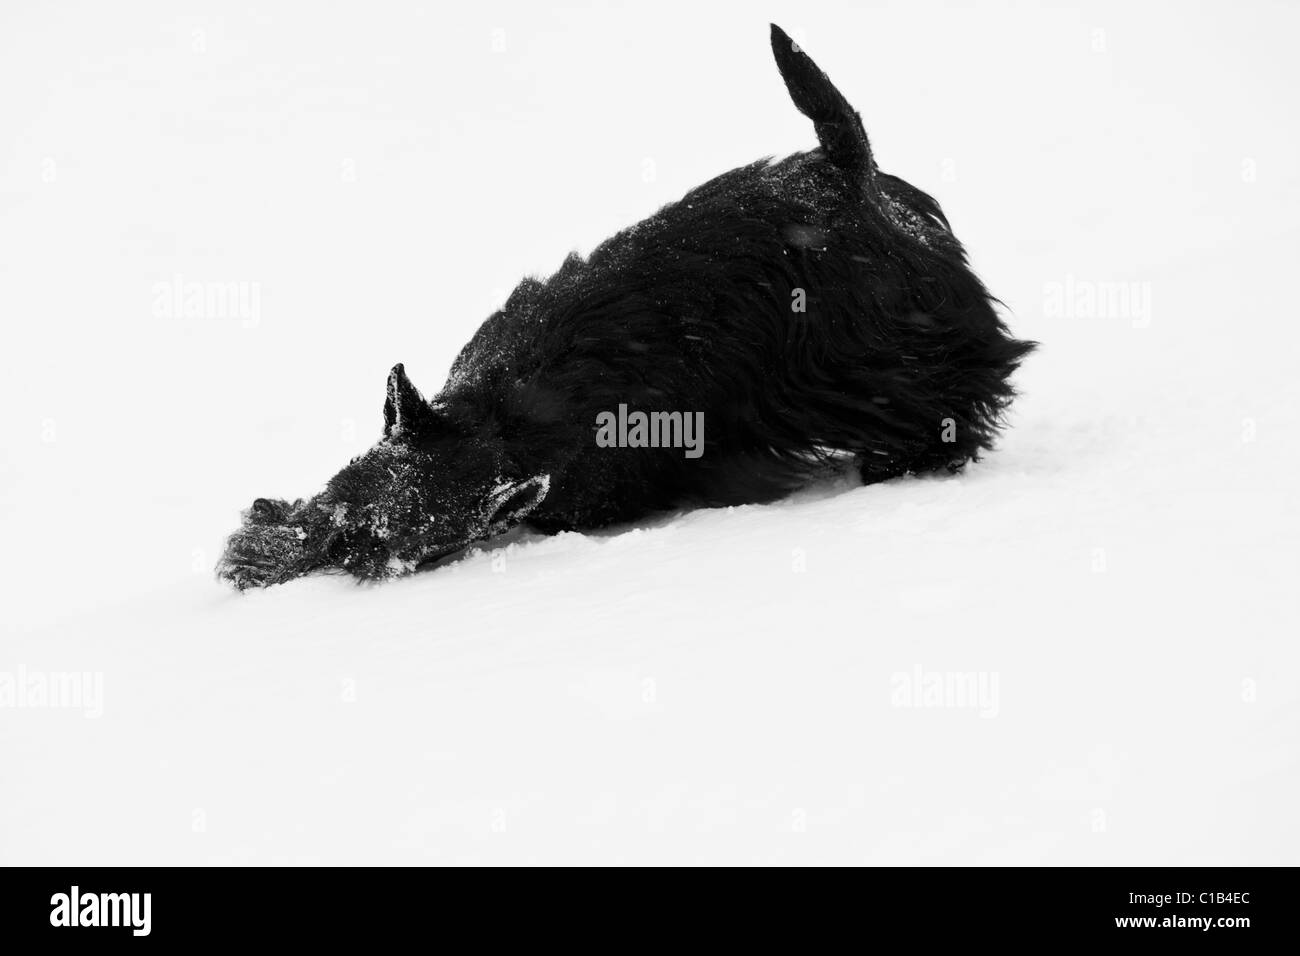 Scottish terrier in the snow Stock Photo